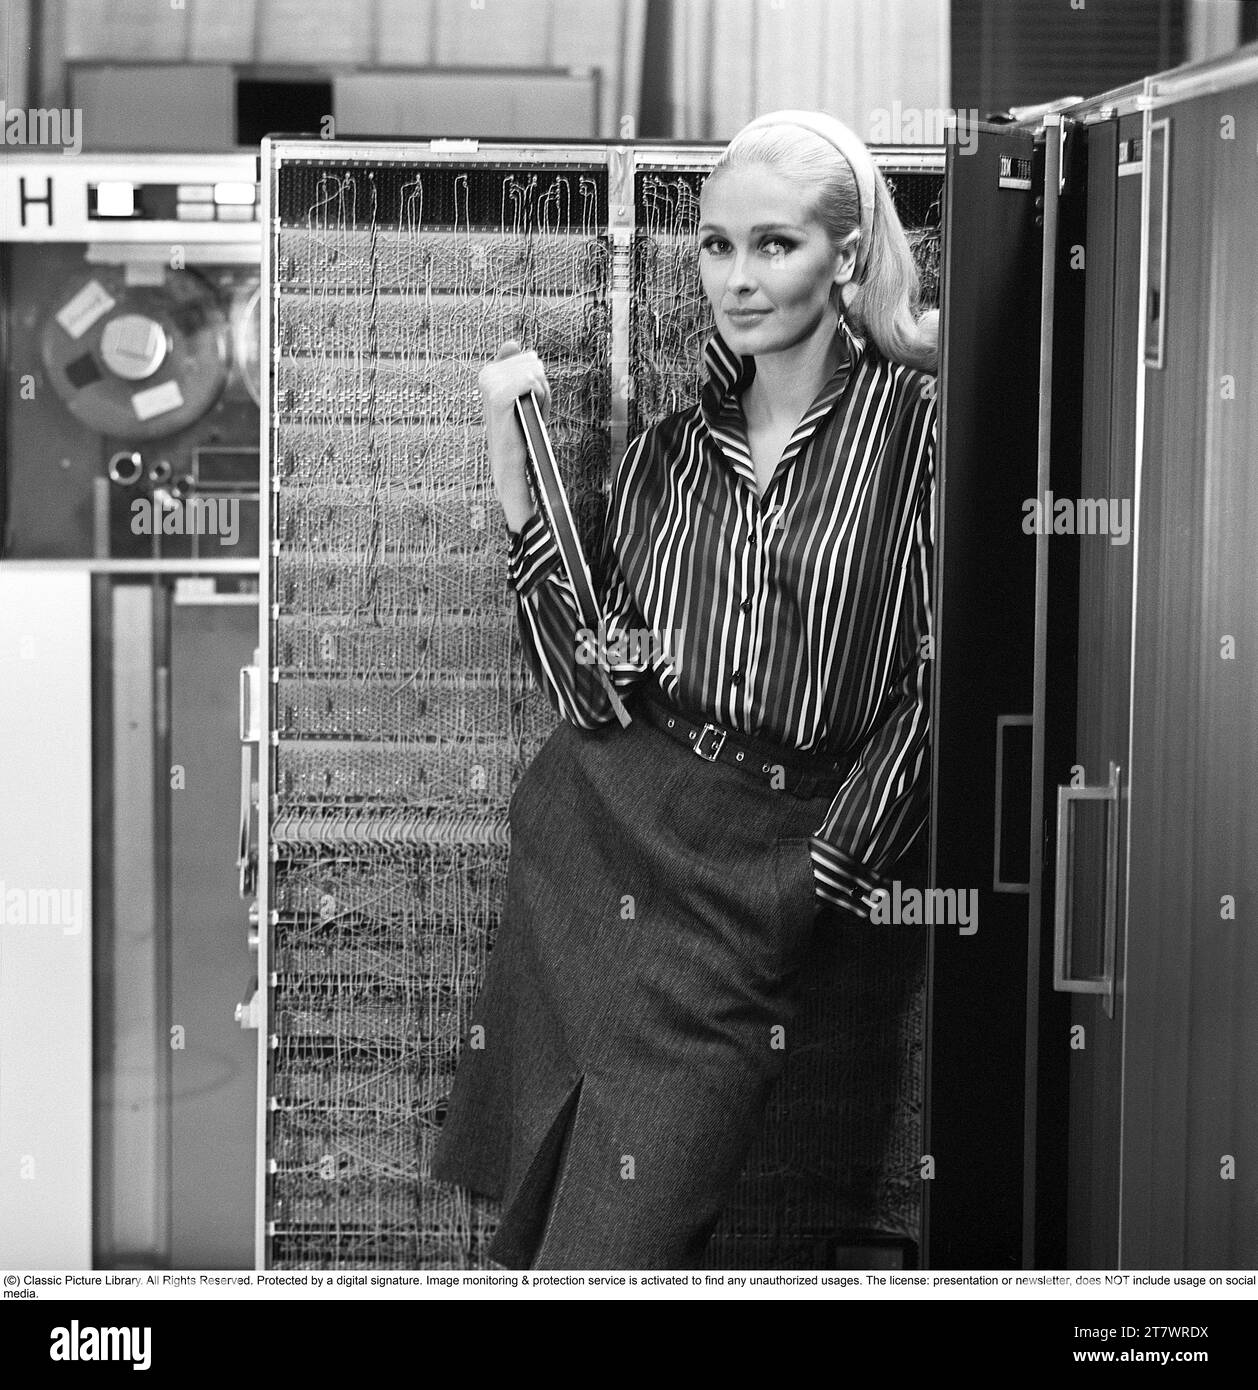 In the 1960s. Fashion model wearing the typical clothes of 1965. The photograph is taken in a 1960s mainframe computer room. Picture taken 1965. ref DV16 Stock Photo